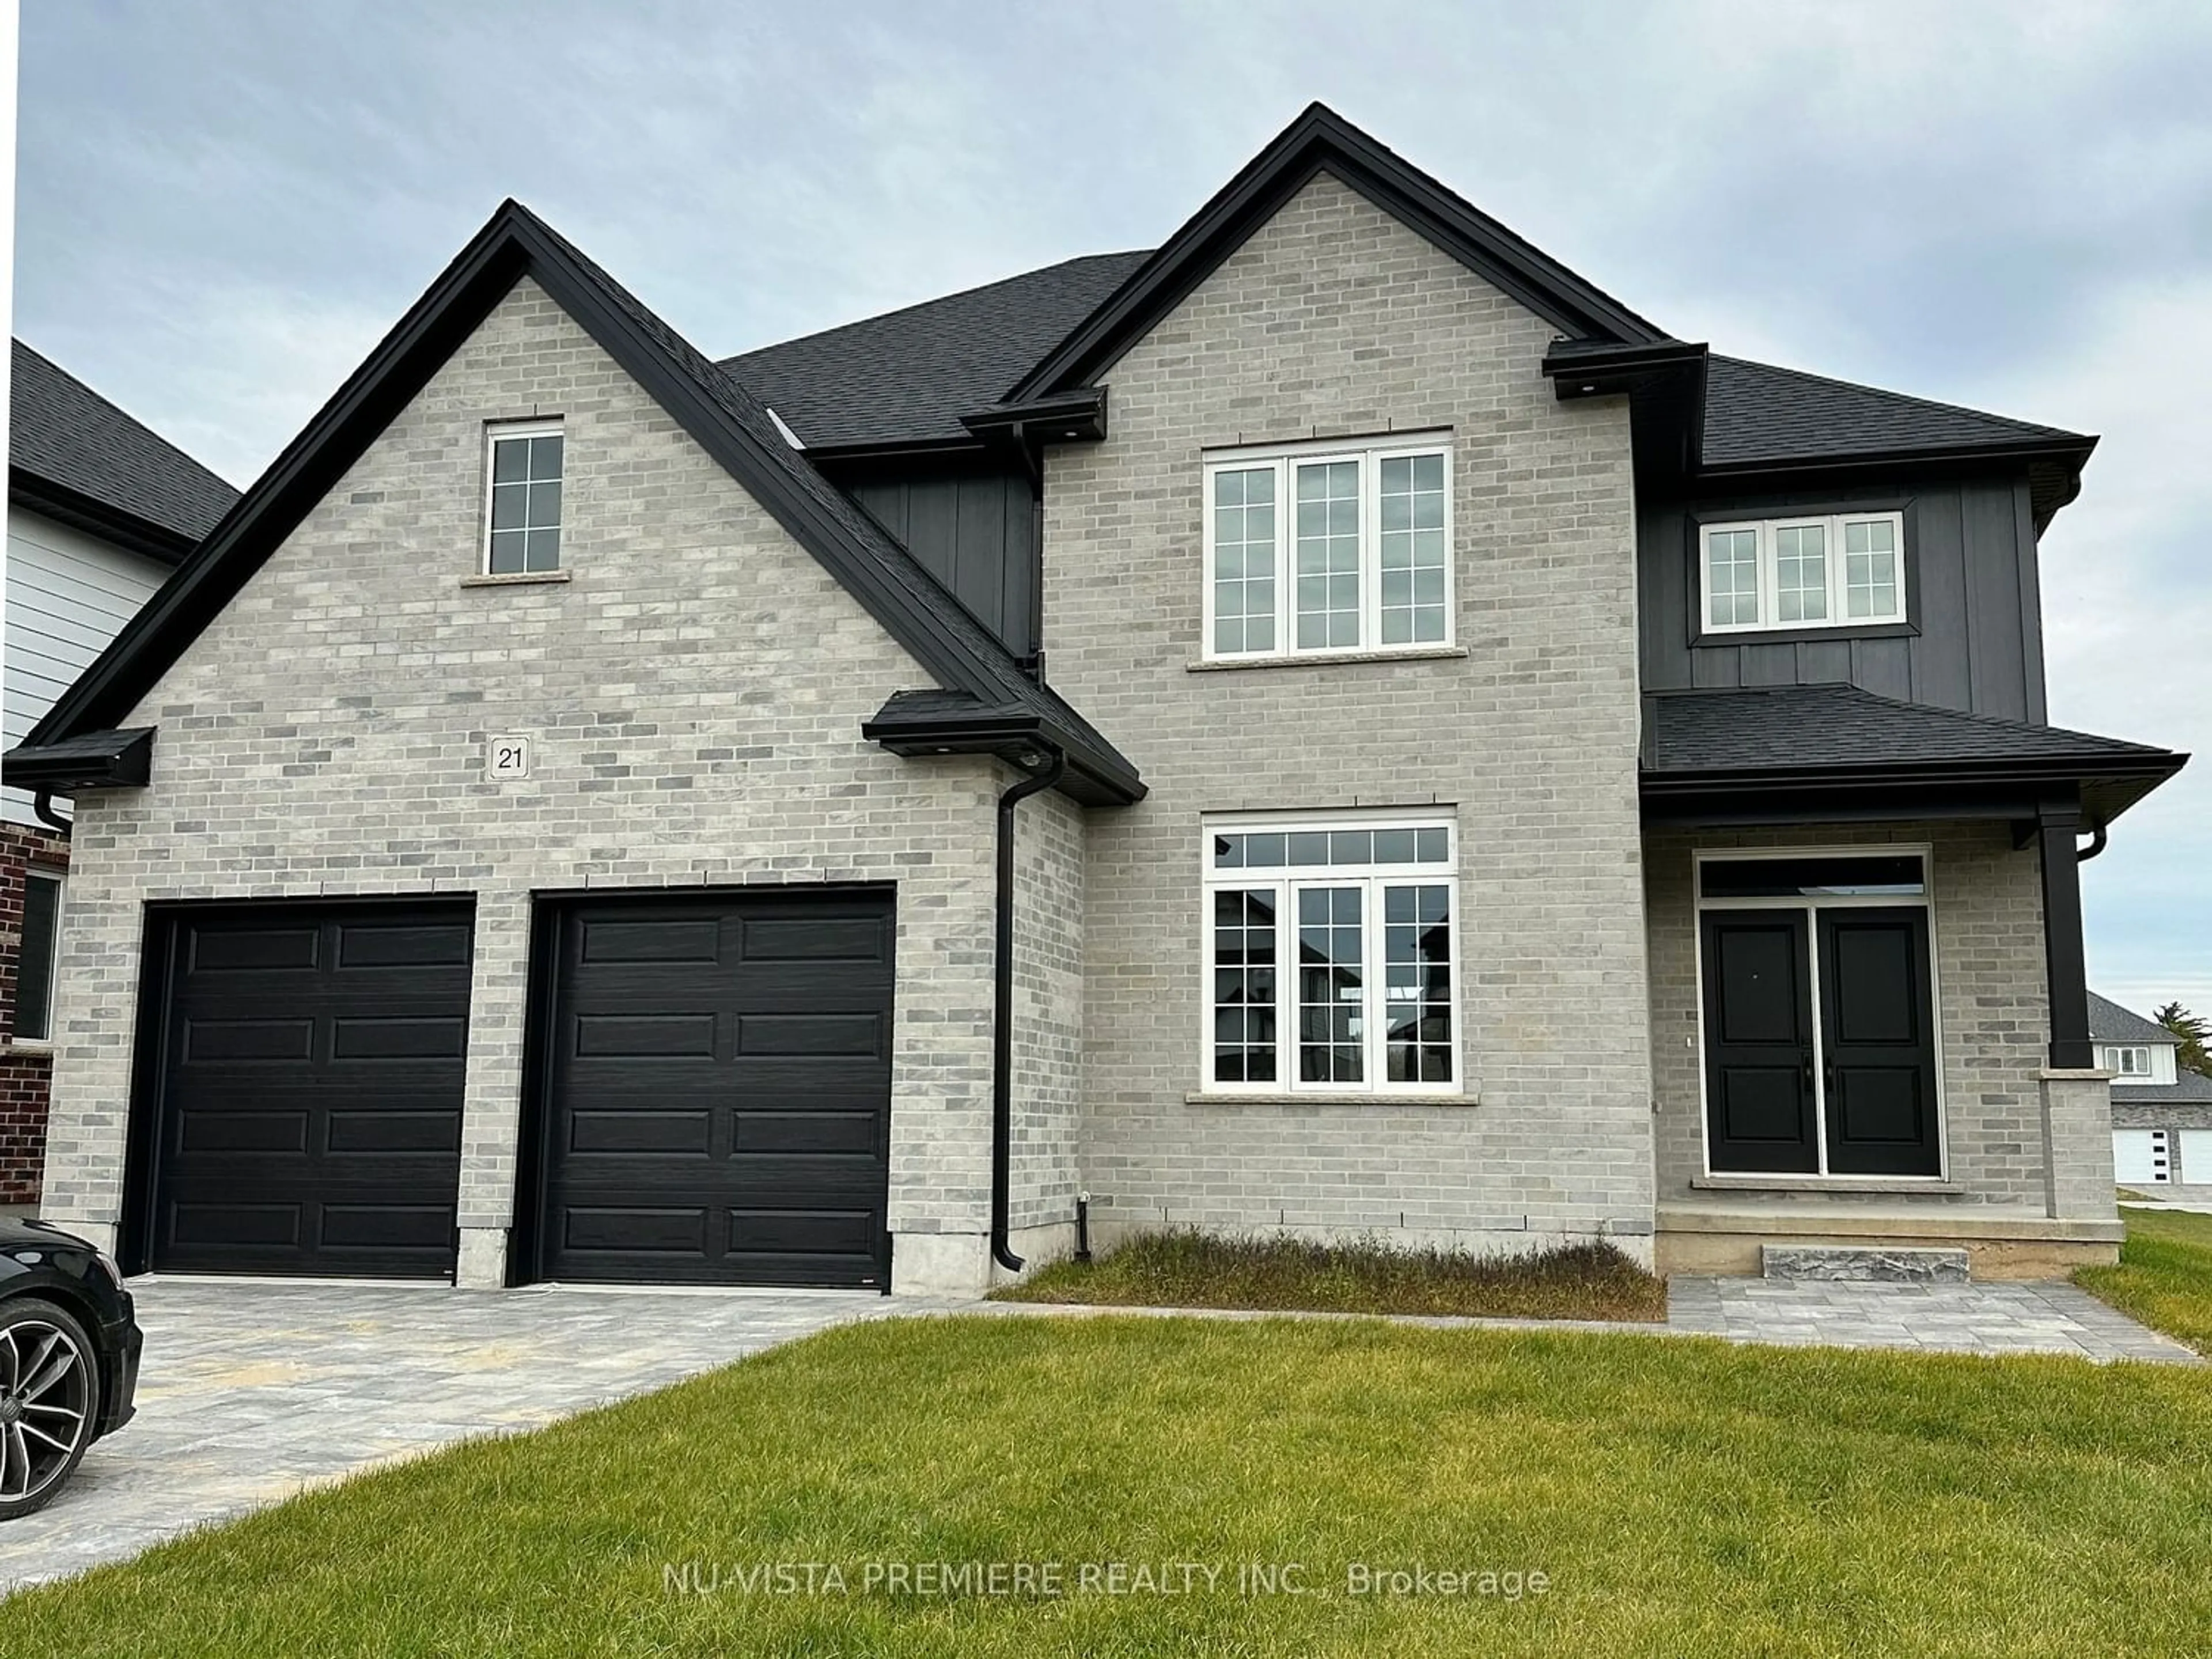 Home with brick exterior material for 21 Greenbrier Rdge, Thames Centre Ontario N0L 1G3